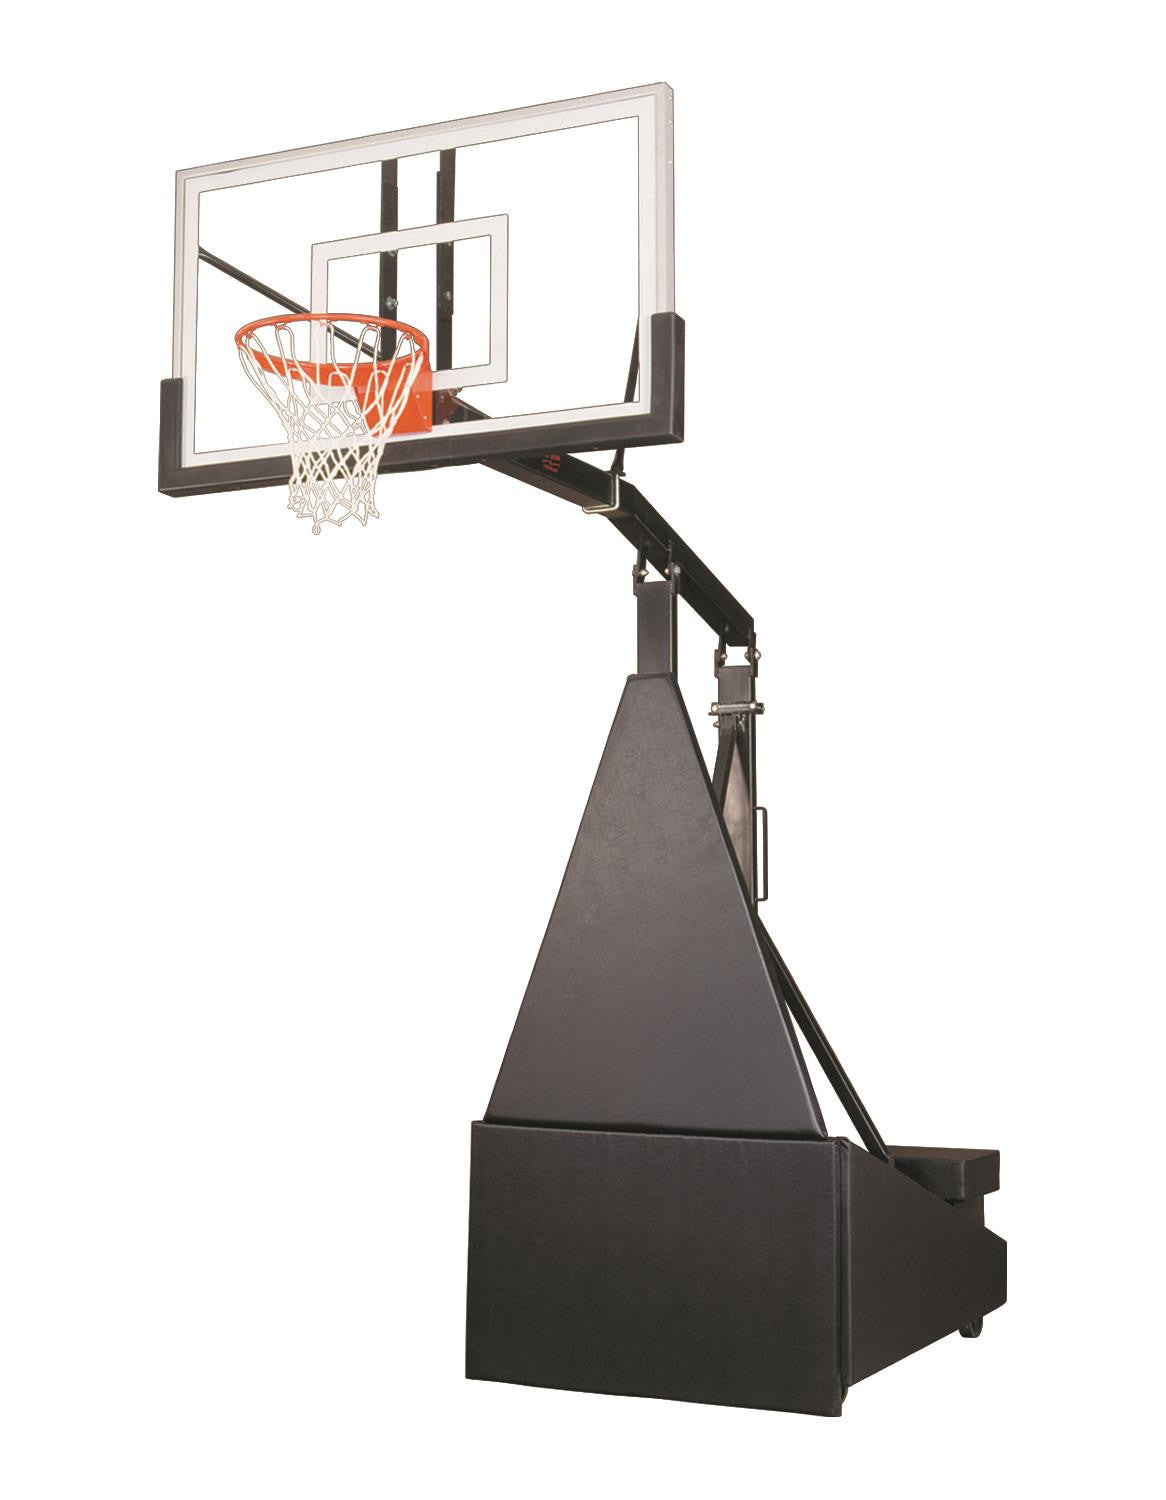 First Team Storm Pro Portable Adjustable Basketball Hoop 60 inch Tempered Glass